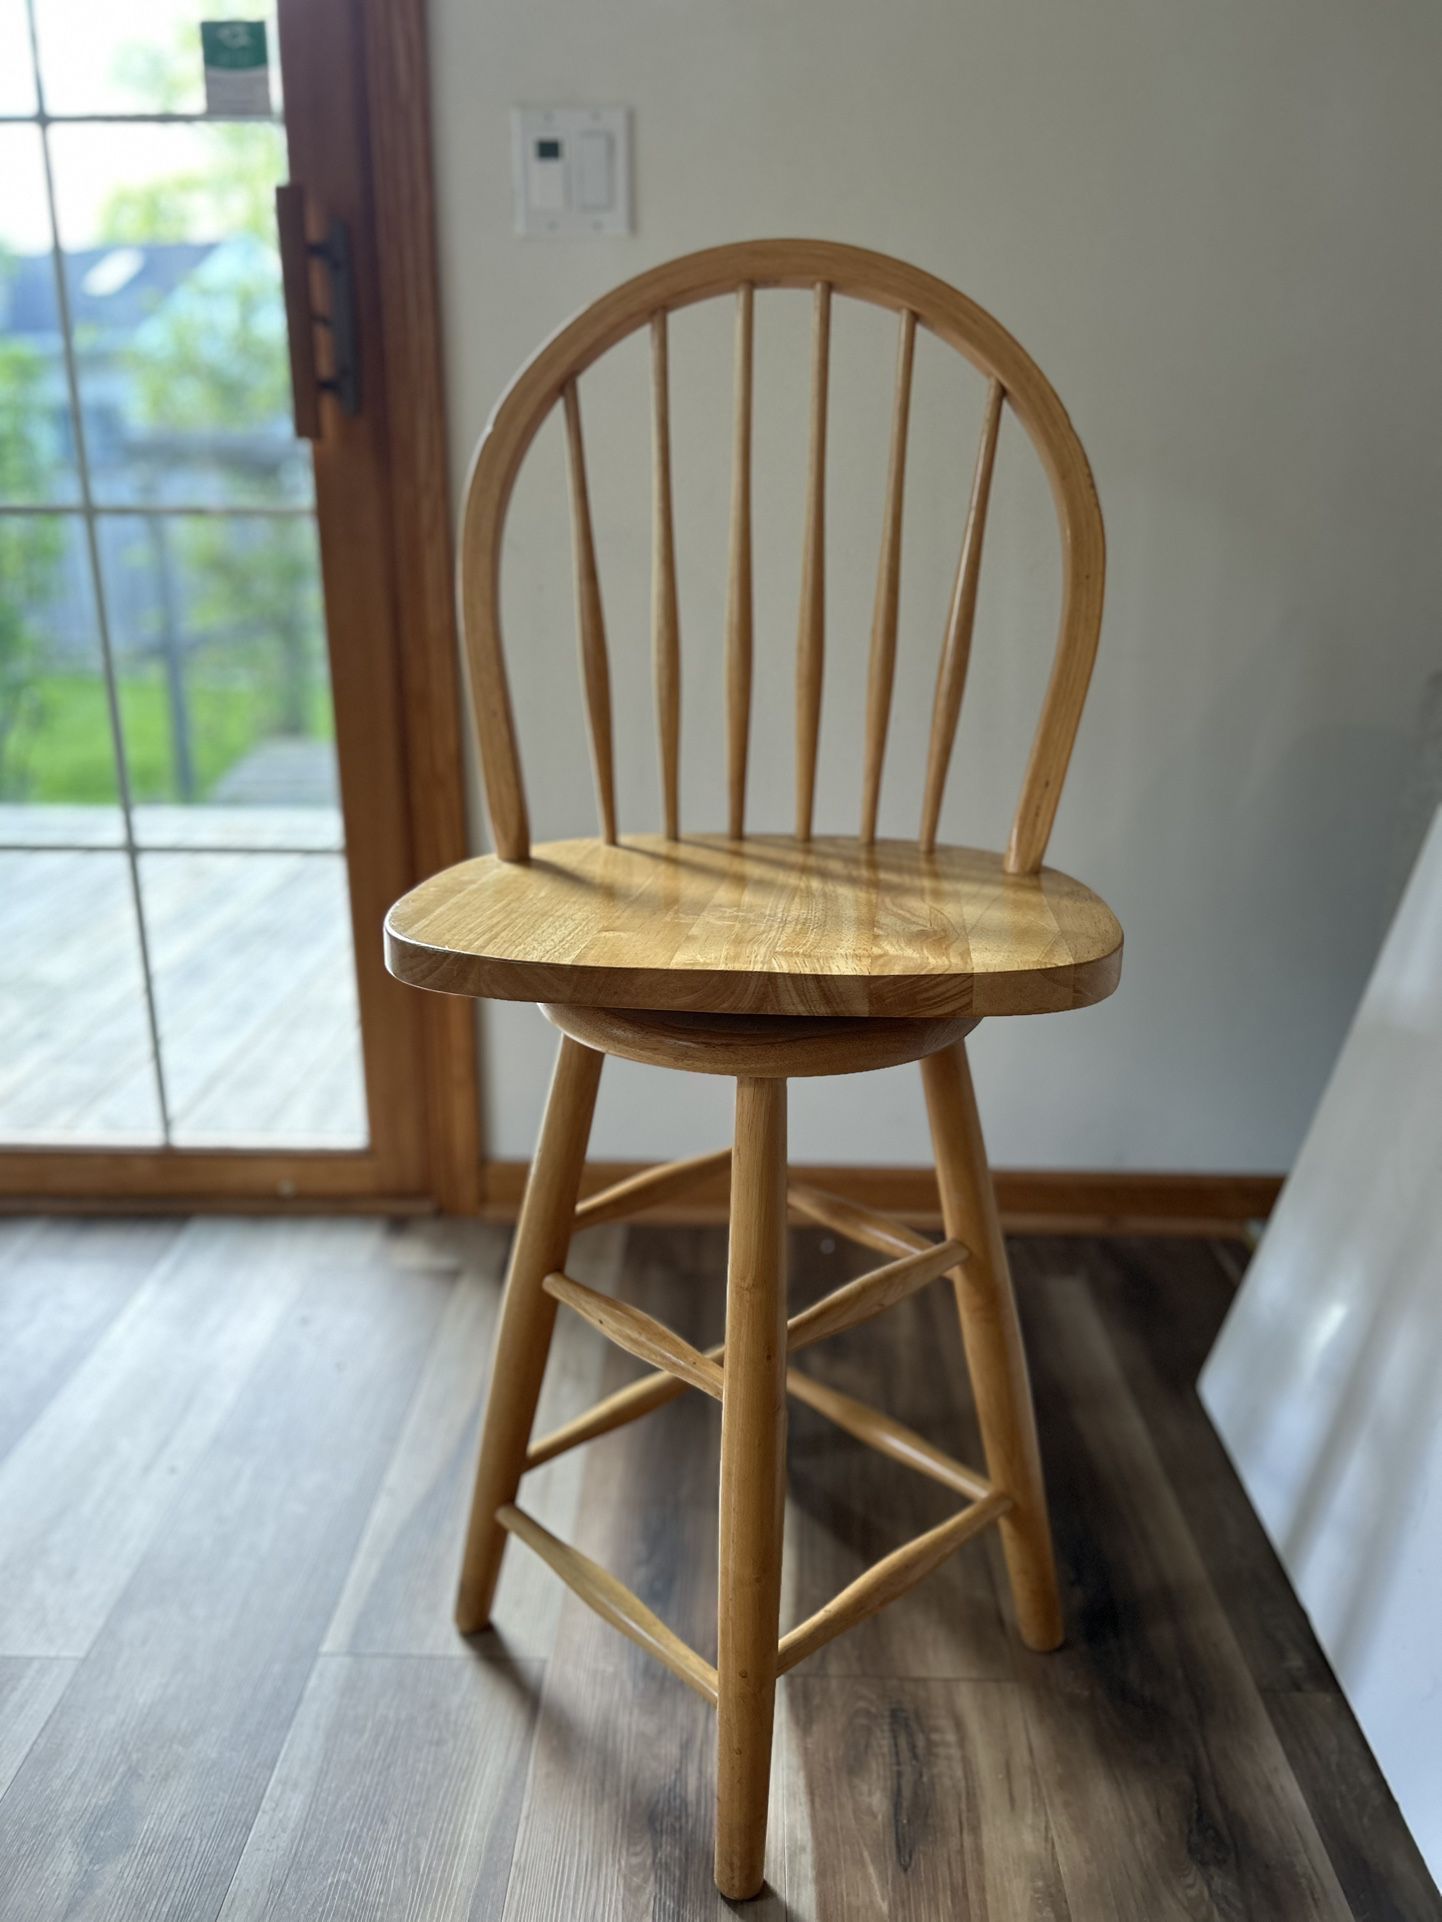 Kitchen Counter Chairs - Bar stools